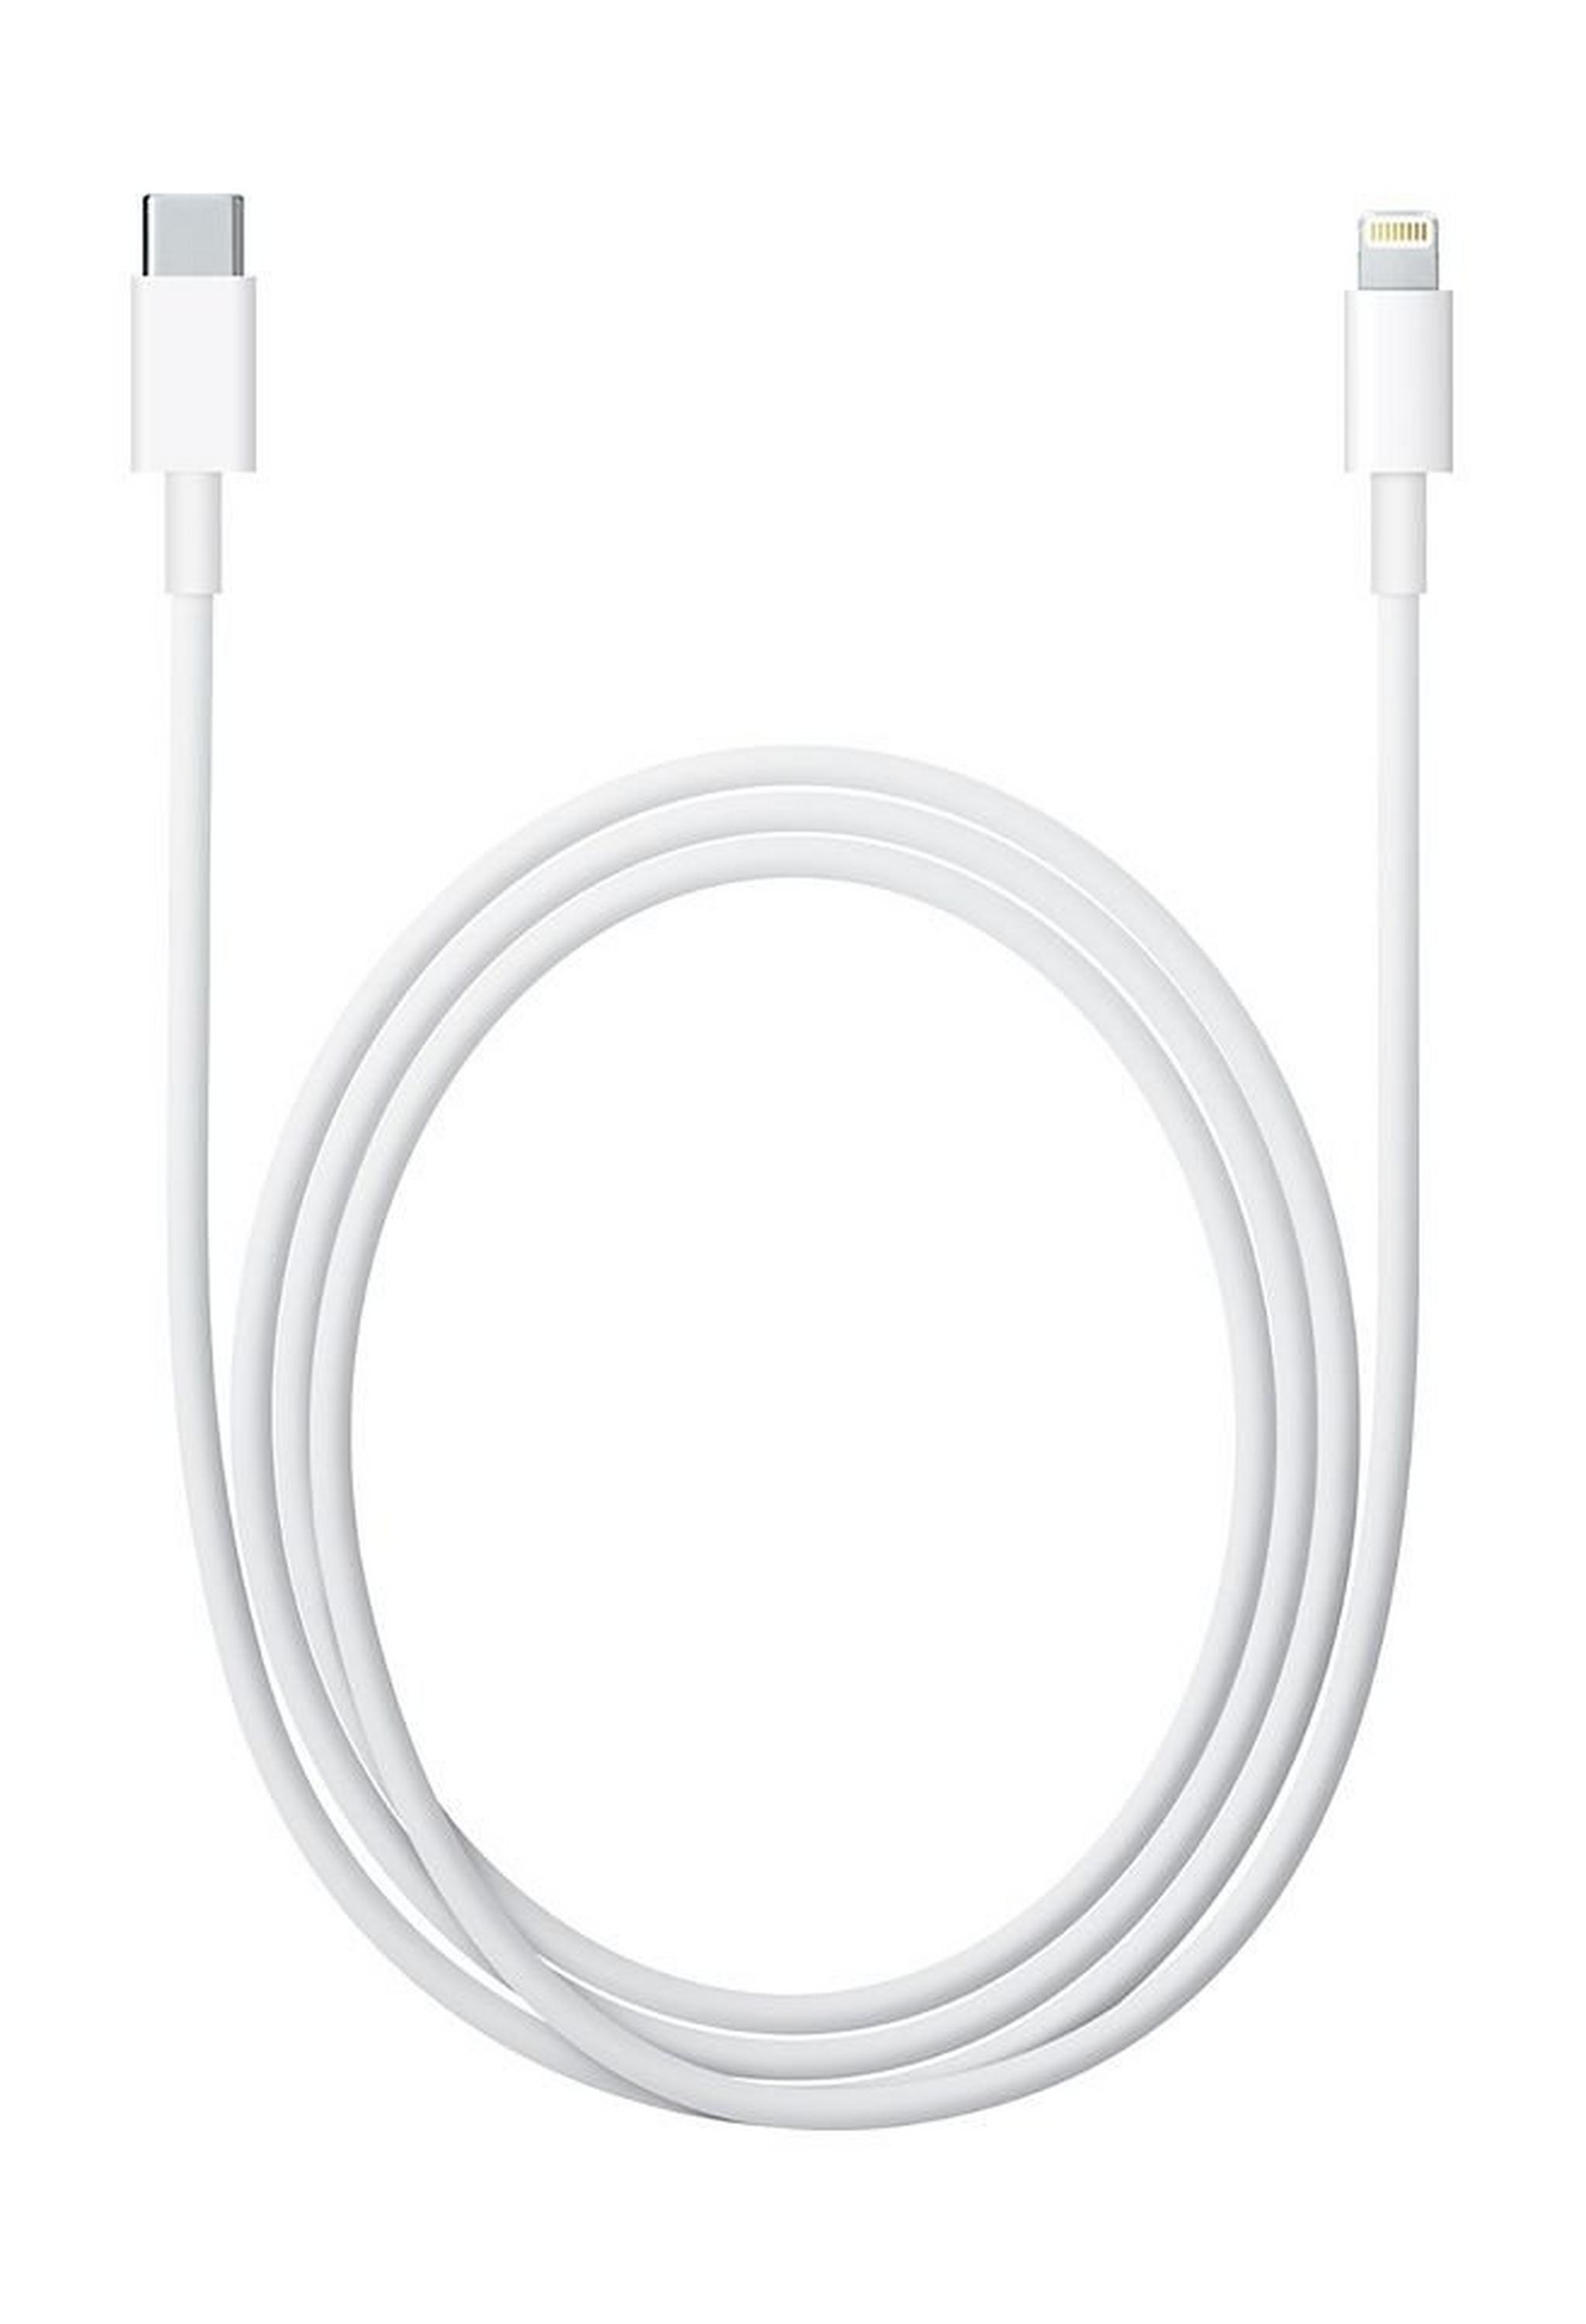 Apple USB-C to Lightning Cable 2 Meters (MKQ42AM/A) - White